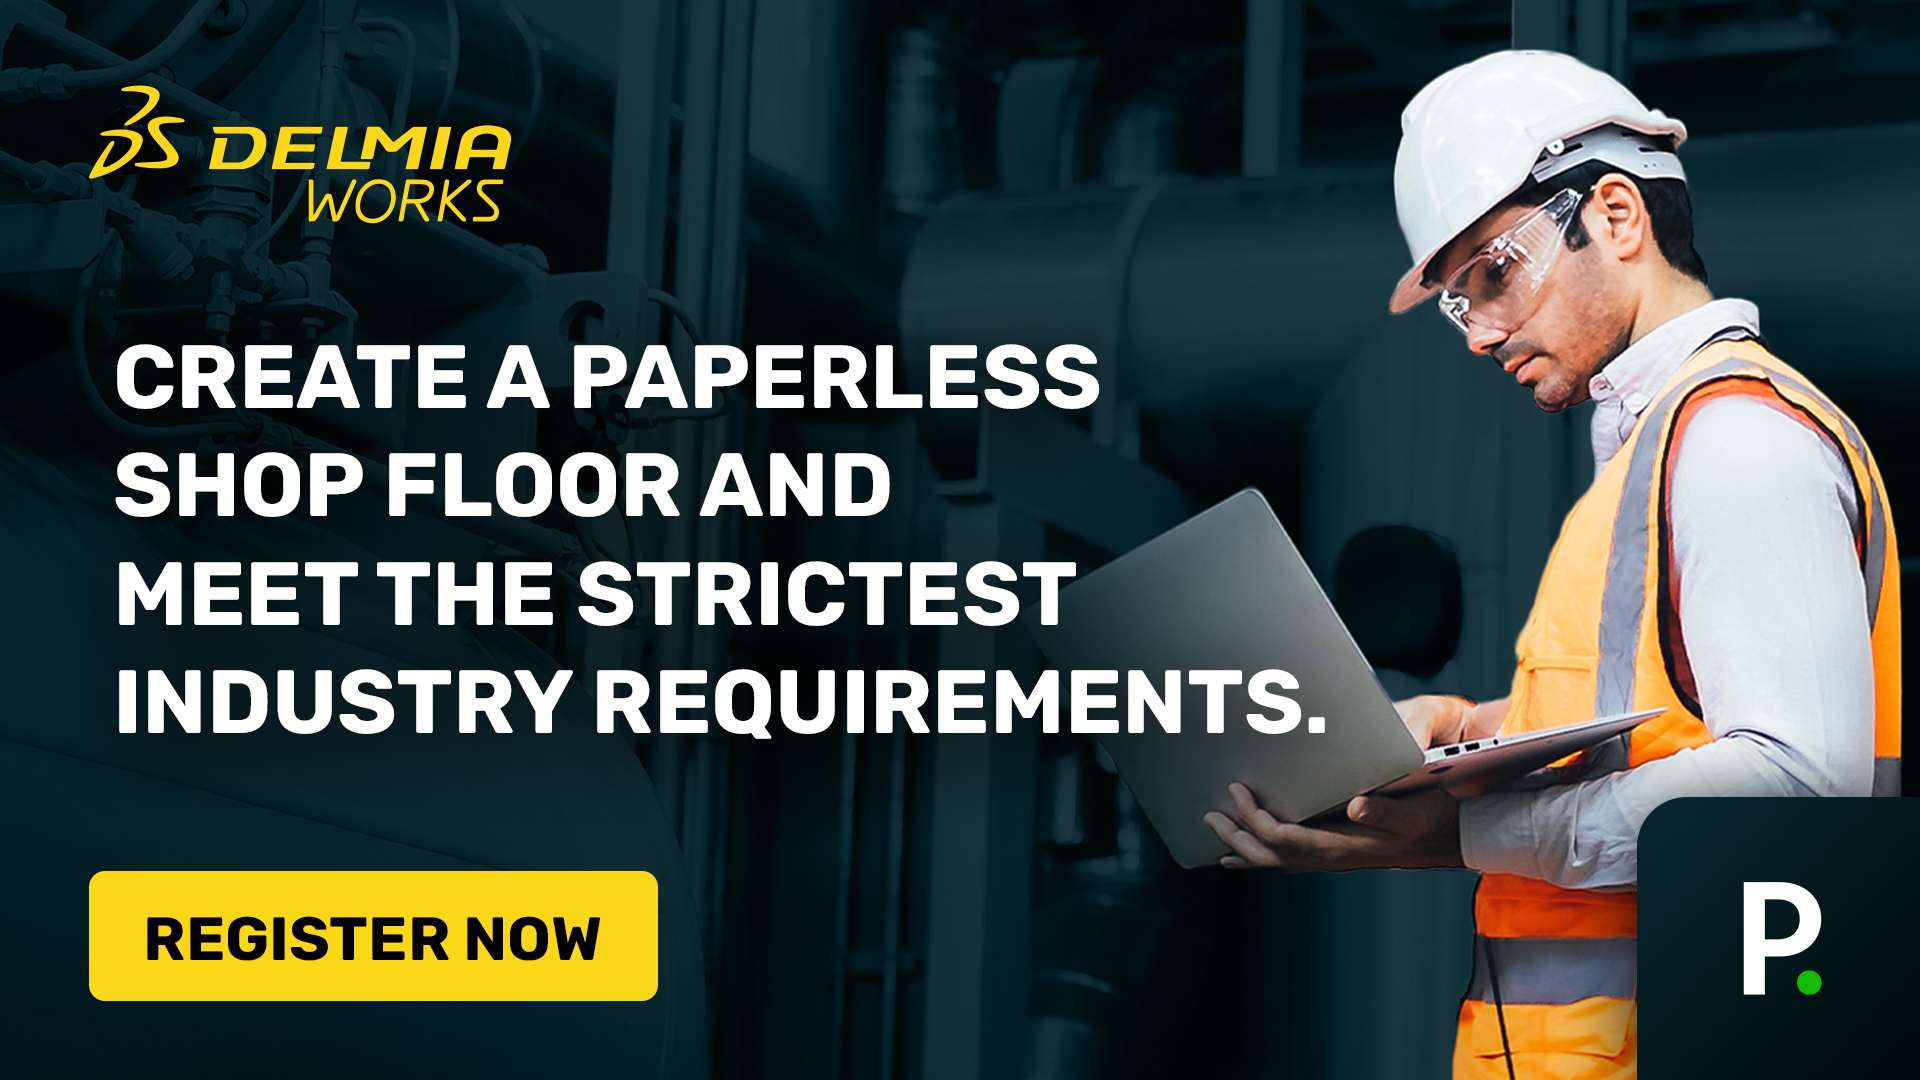 Create a paperless shop floor and meet the strictest industry requirements